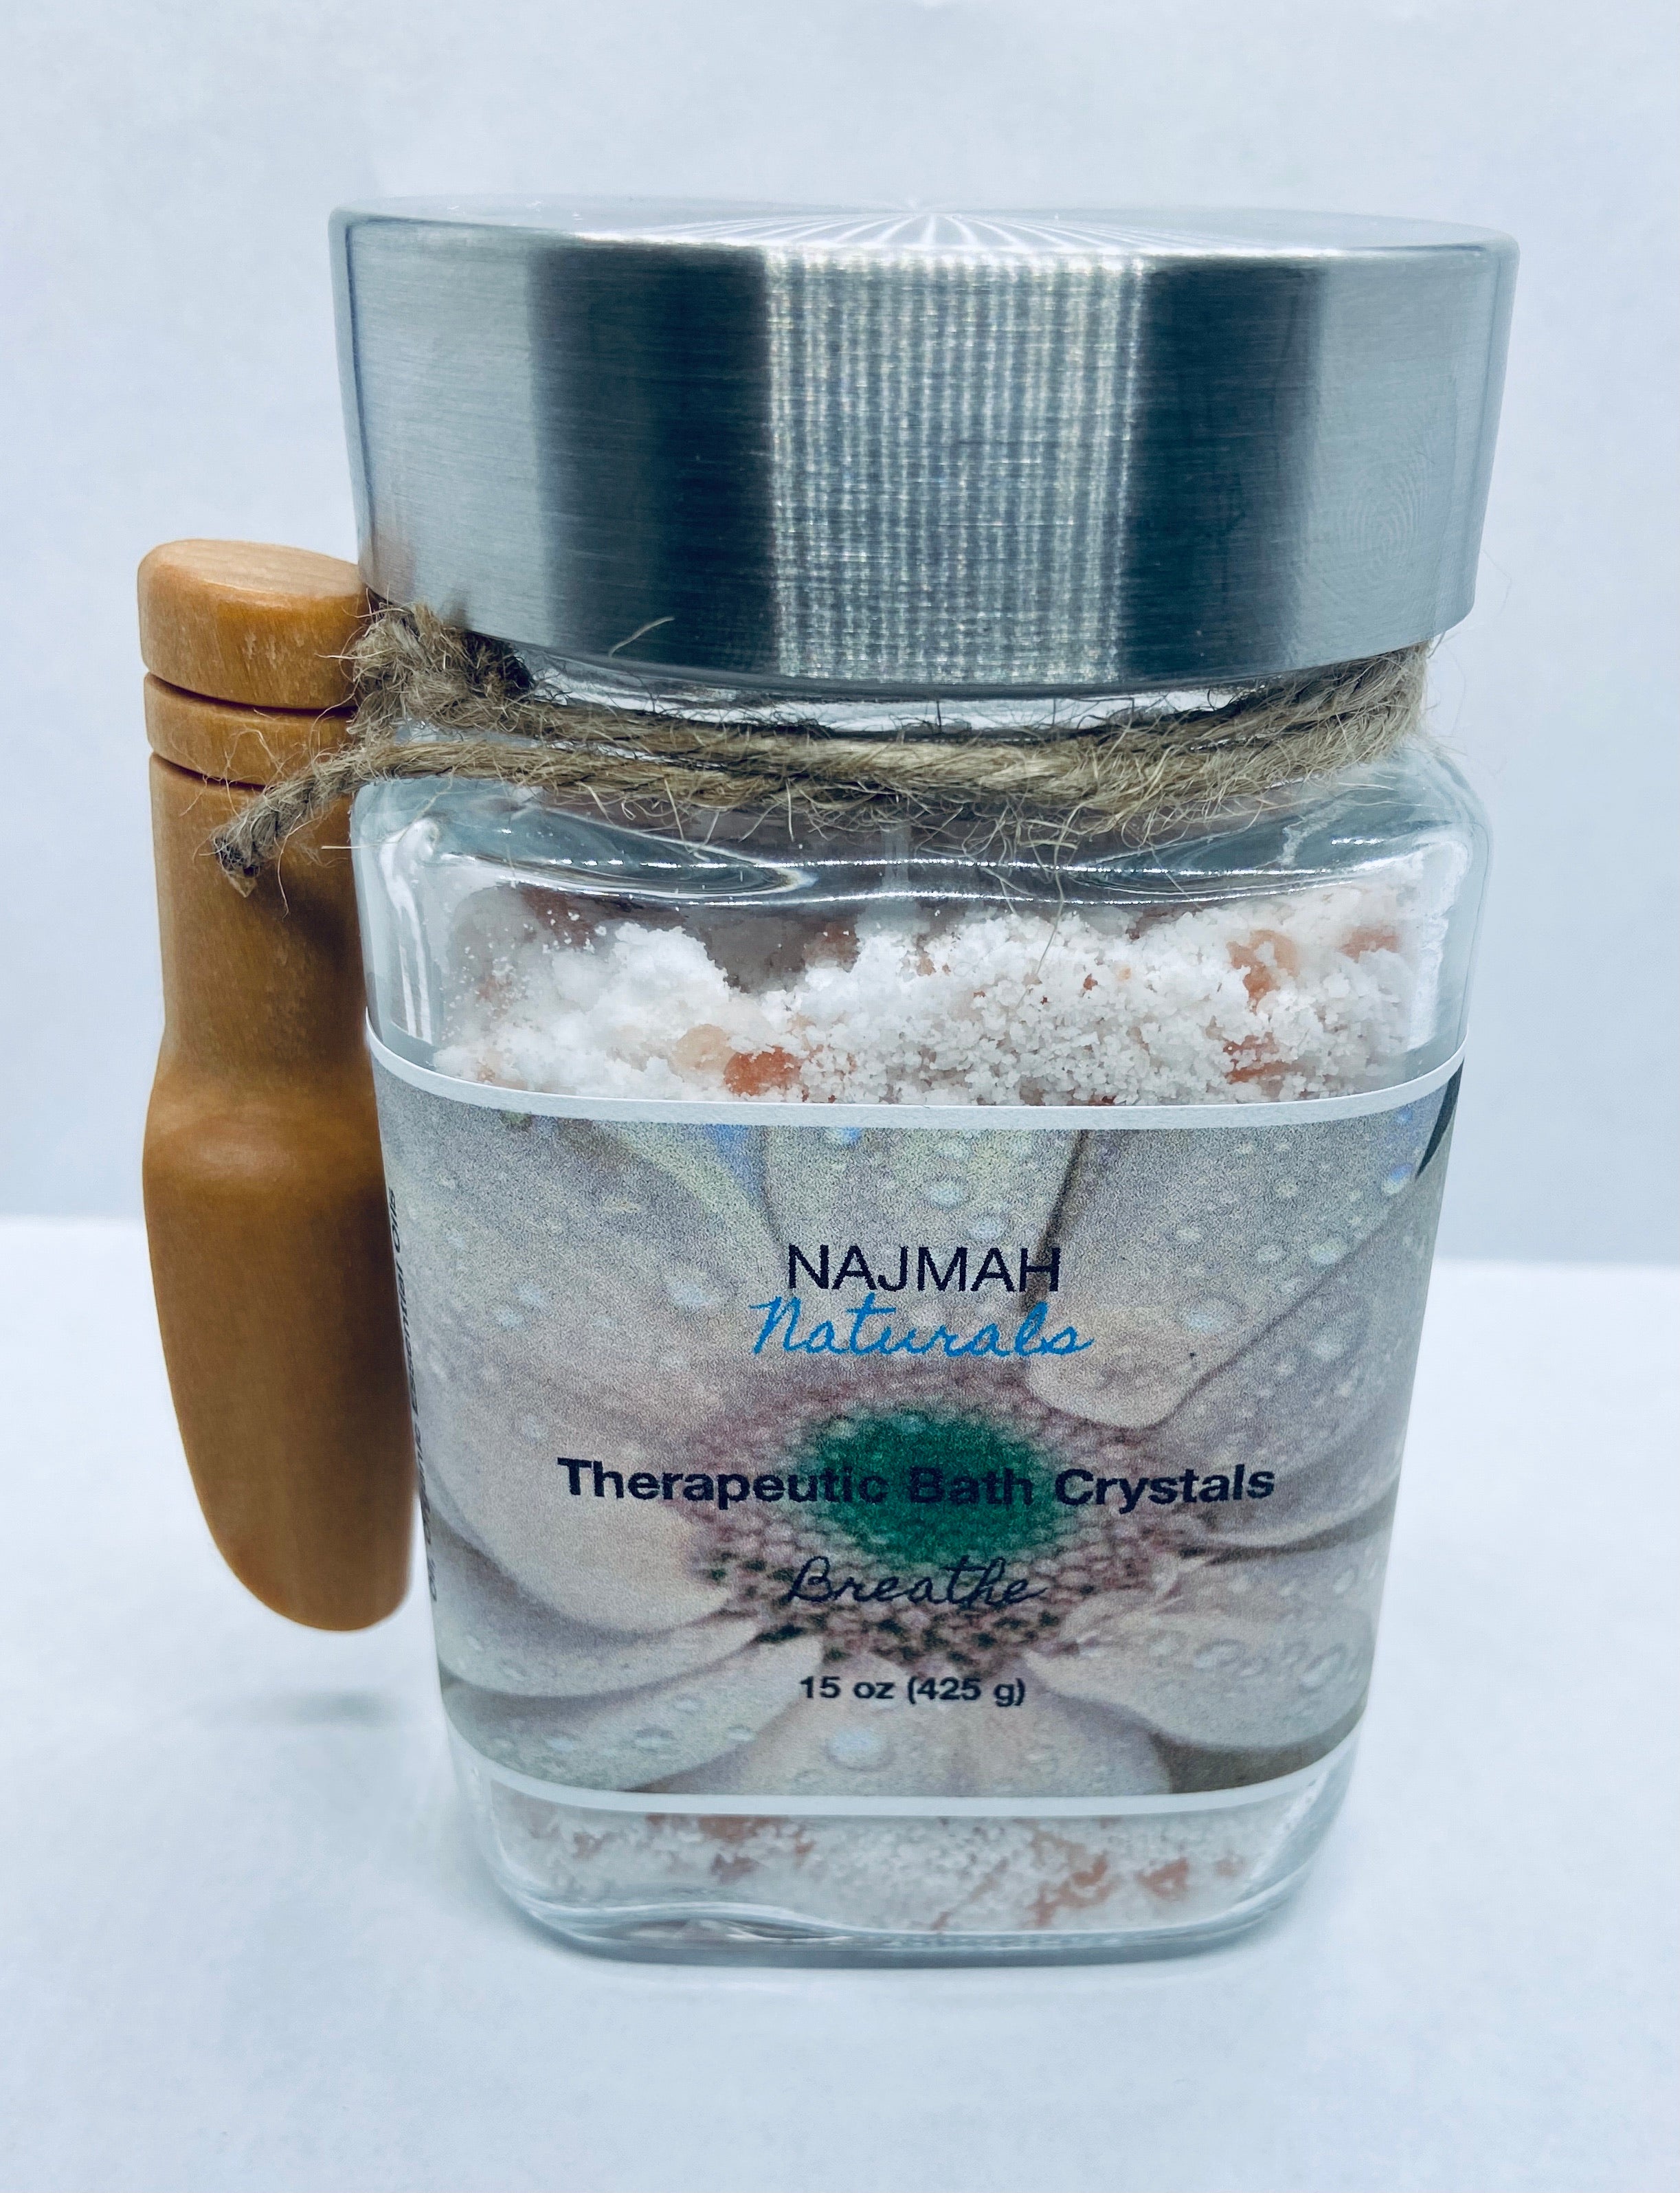 Our Breathe Therapeutic Bath Crystals are the ultimate relaxation, self care herbal salts with Epson Salt, Himalayan Pink Salt, Sodium Bicarbonate (Aluminum-Free), Organic Coconut Oil and Organic Essential Oils. Smells like peppermint and it's a customer favorite!